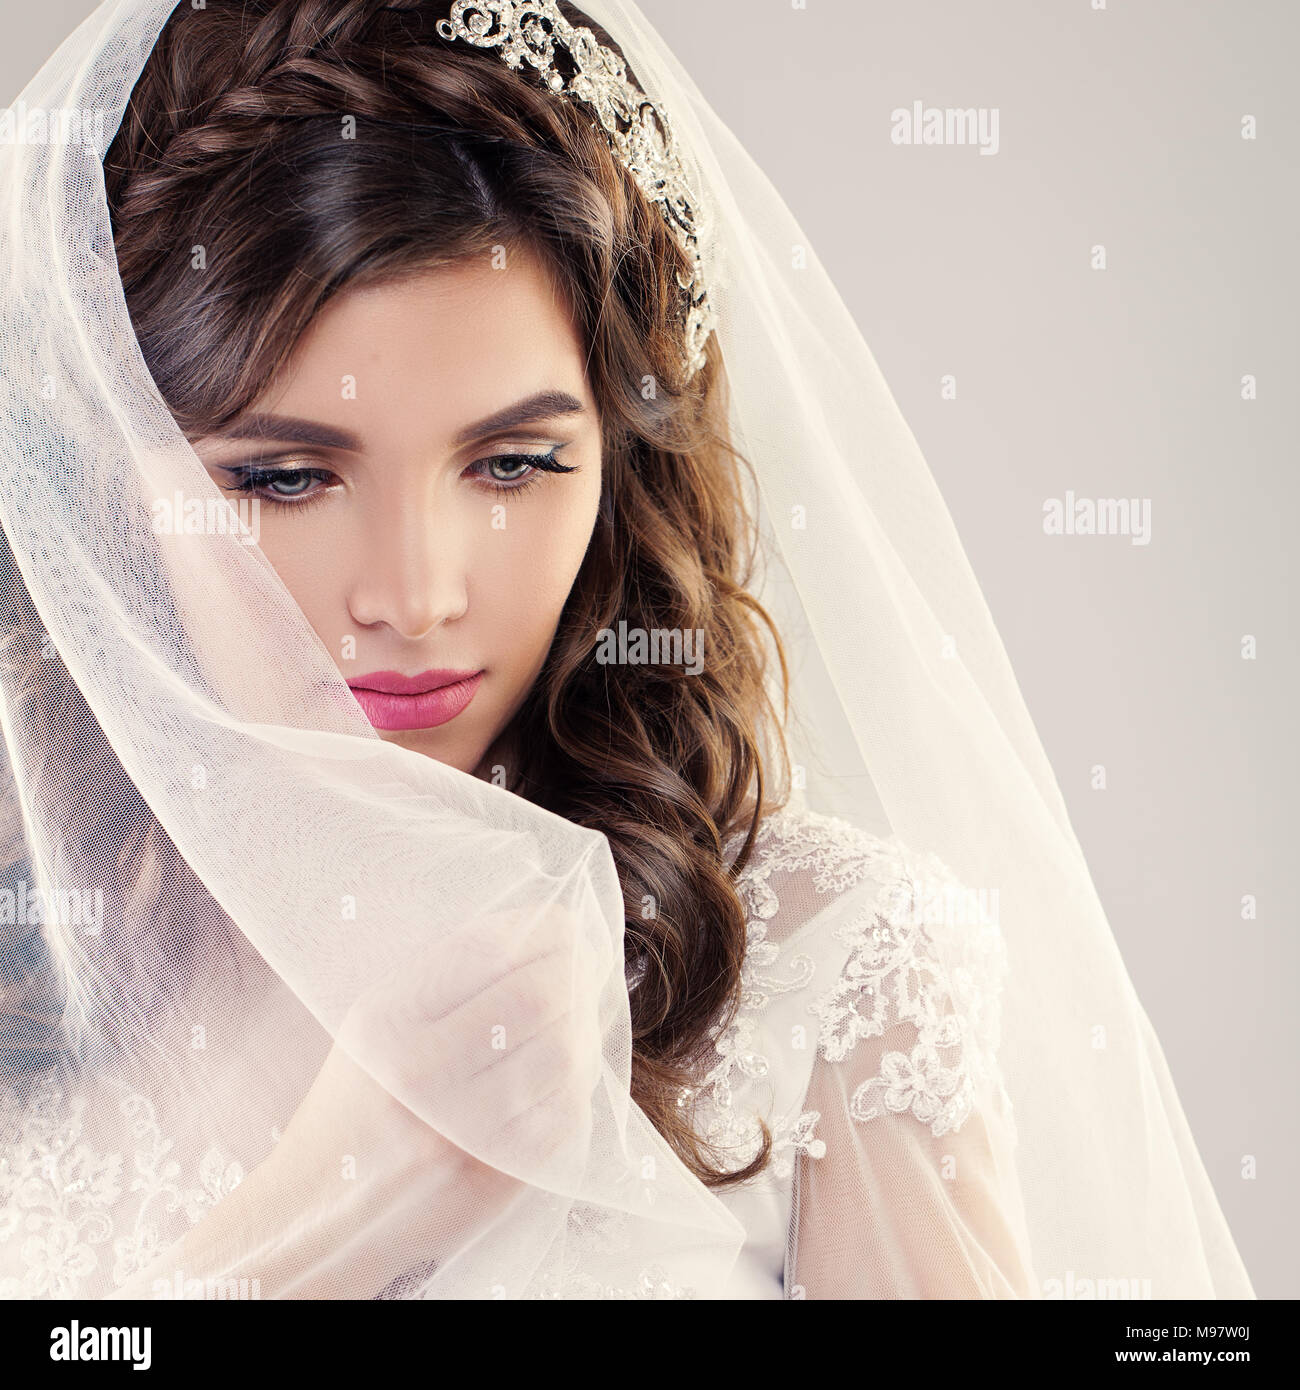 Fashion Portrait of Perfect Bride. Beautiful Fiancee with Curly Hair, Makeup and White Veil Stock Photo